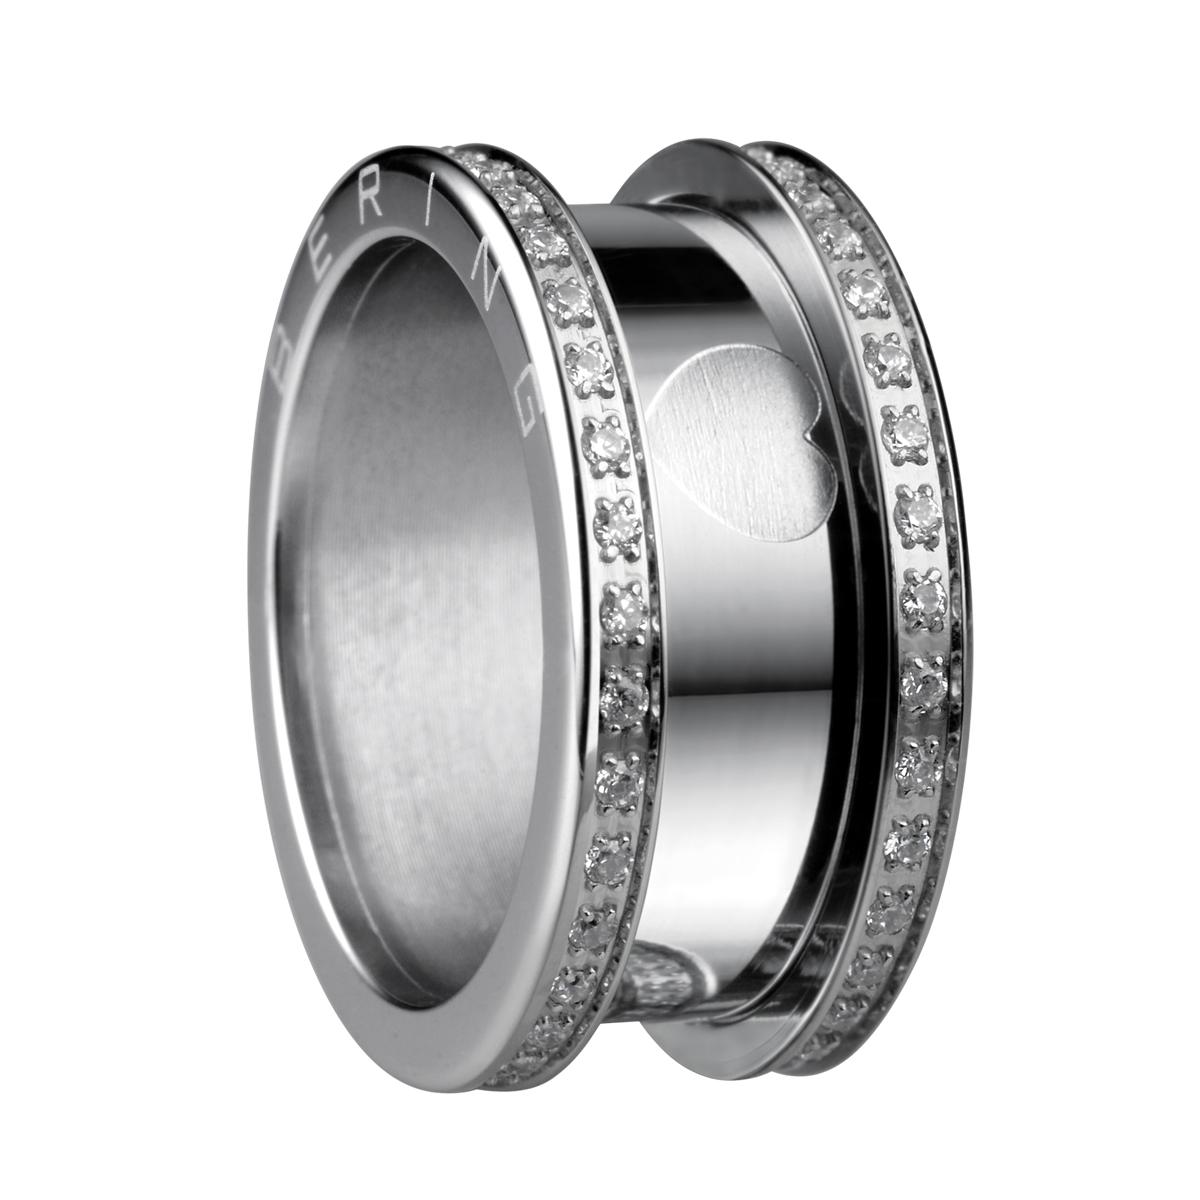 Bering Outer Ring 5231784 1